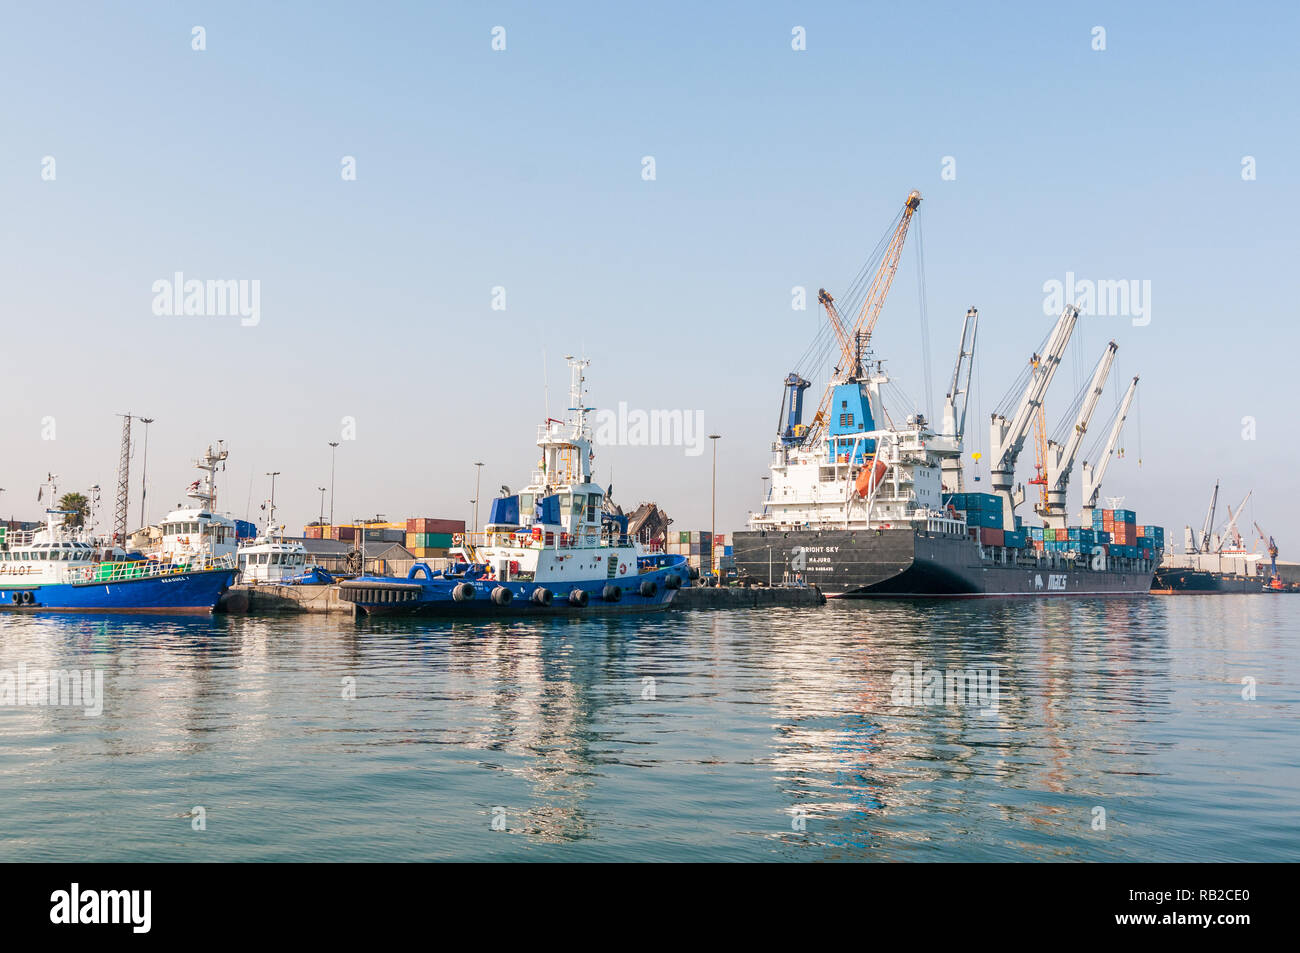 boat with cranes in the harbor, Walvis Bay, Namibia Stock Photo